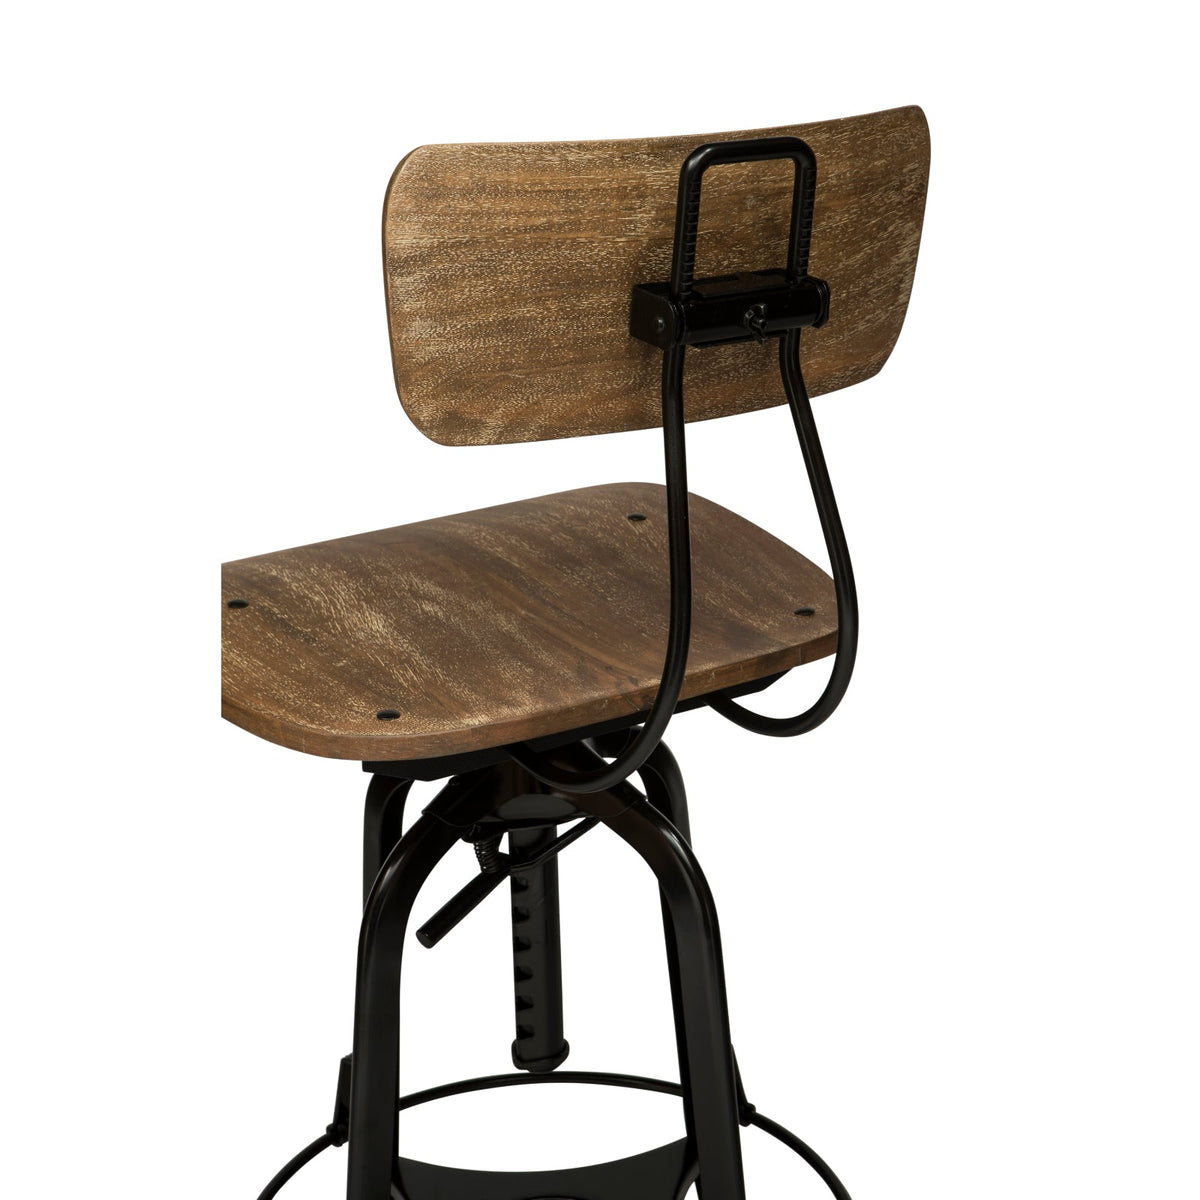 Wooden Bar Stool with Rustic Finish - Wine Stash